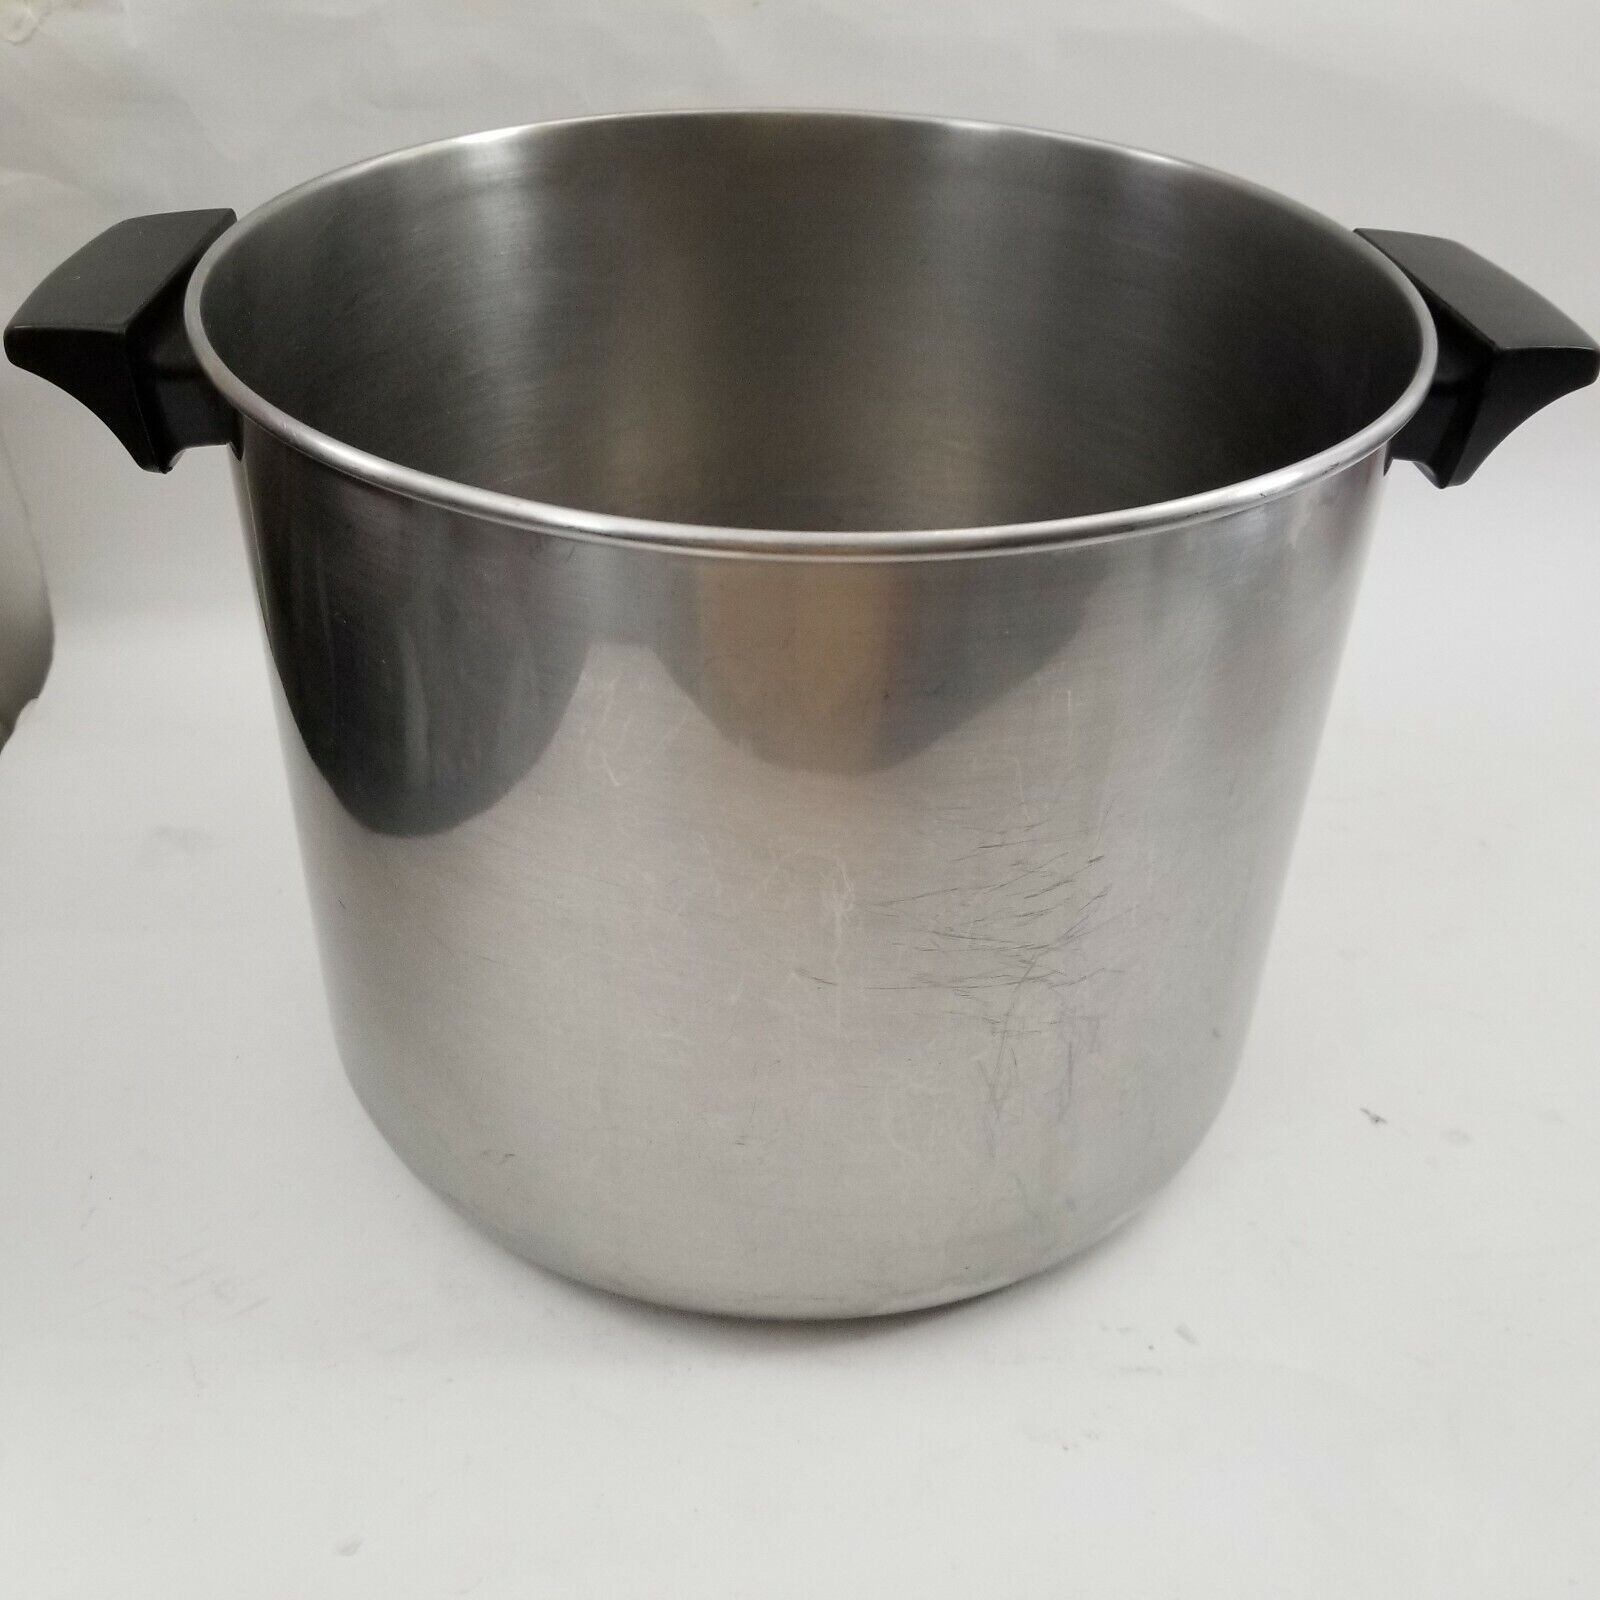 Revere Ware 8 Qt Stock Pot Pan Stainless Steel